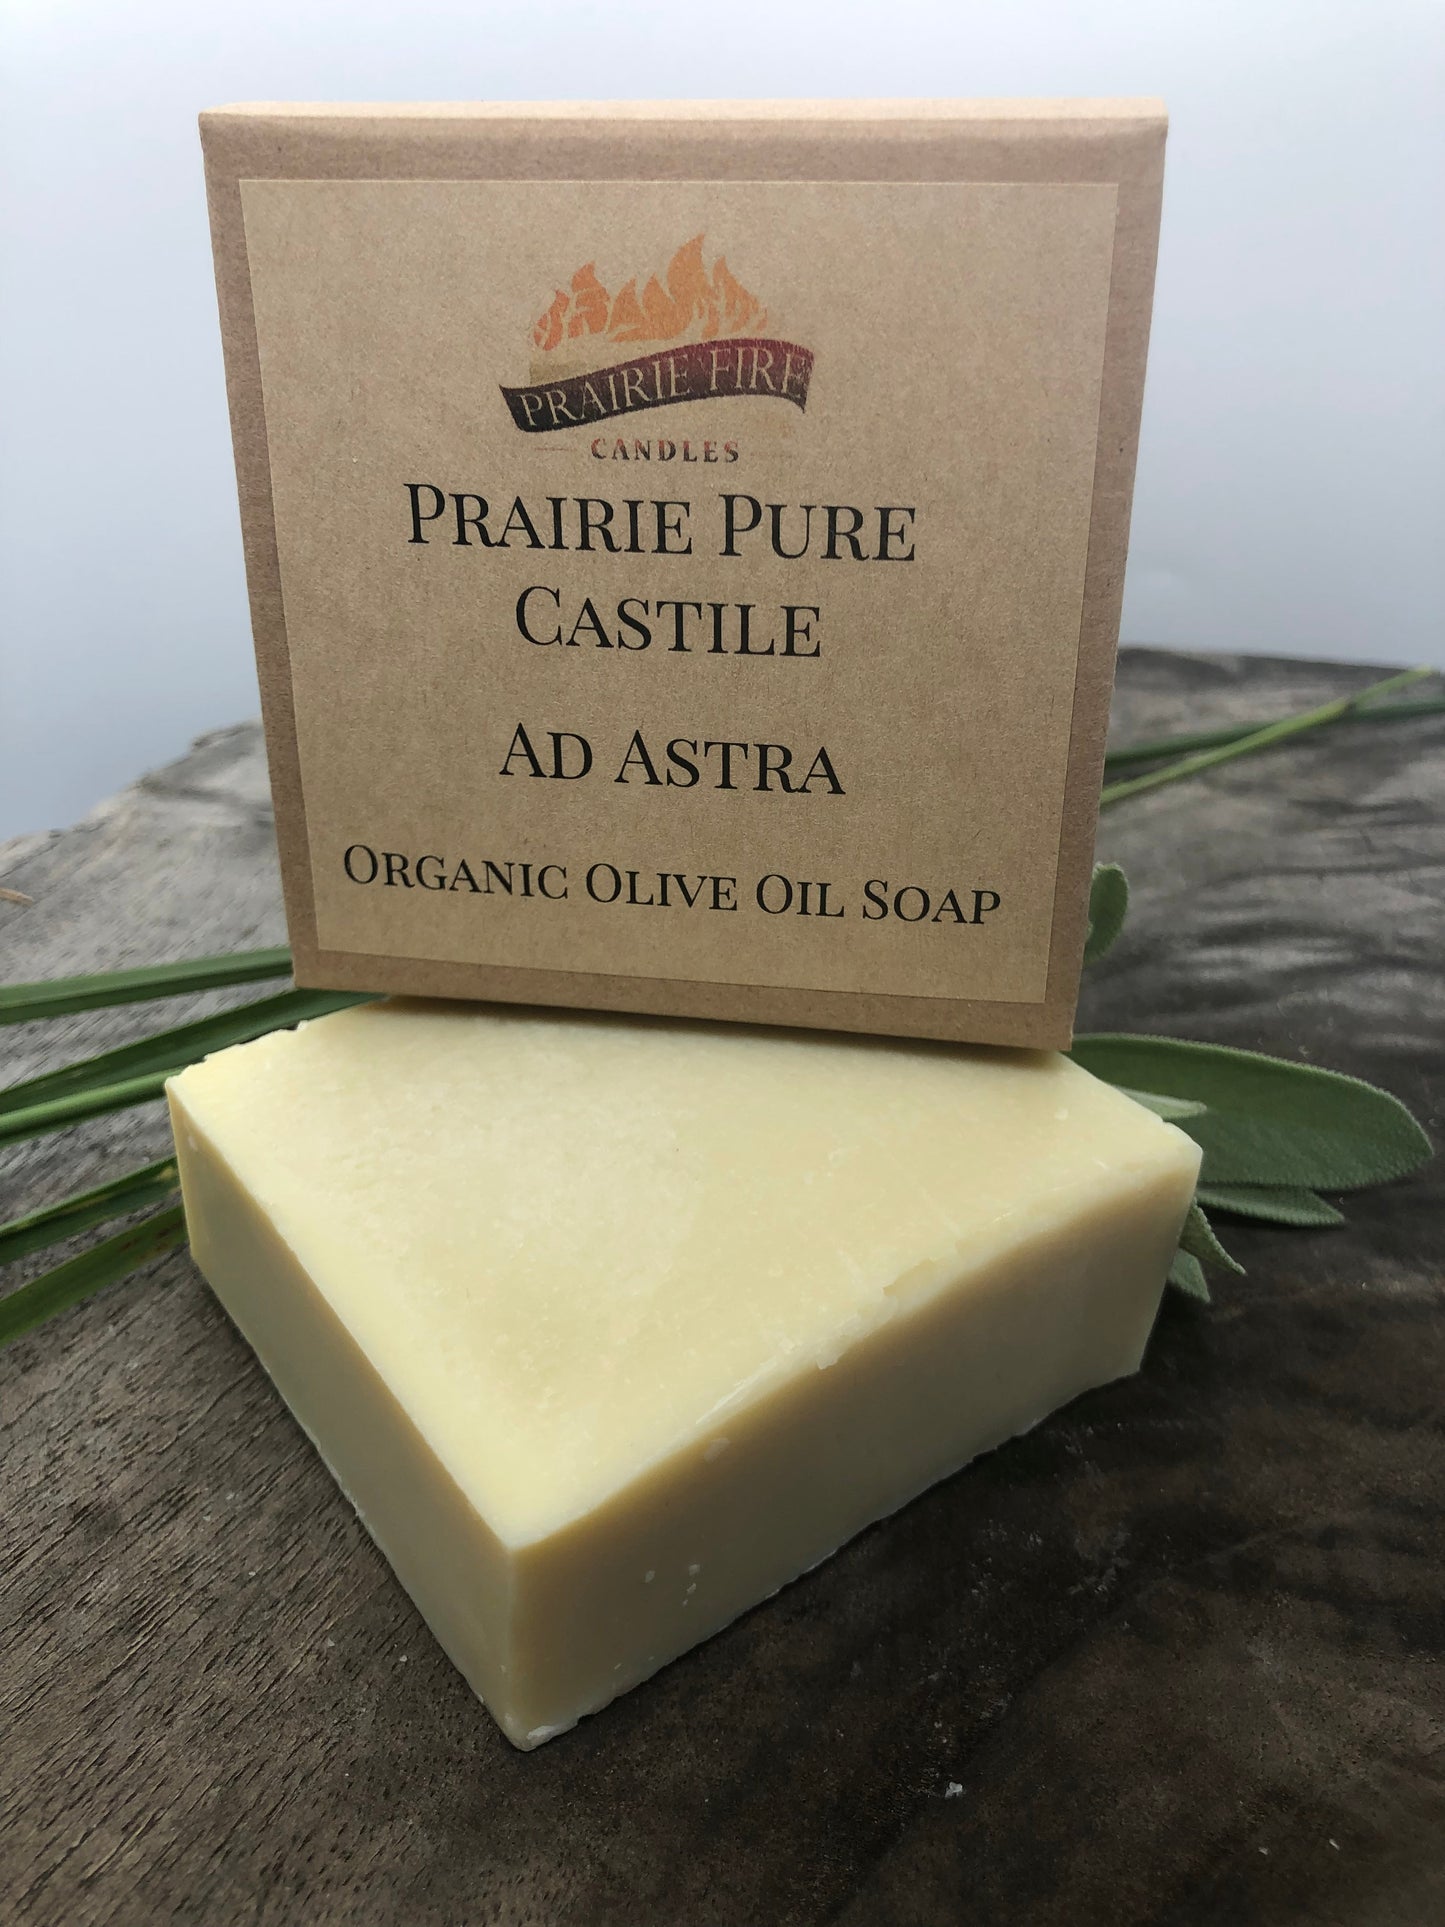 Ad Astra Real Castile Organic Olive Oil Soap for Sensitive Skin - Dye Free - 100% Certified Organic Extra Virgin Olive Oil